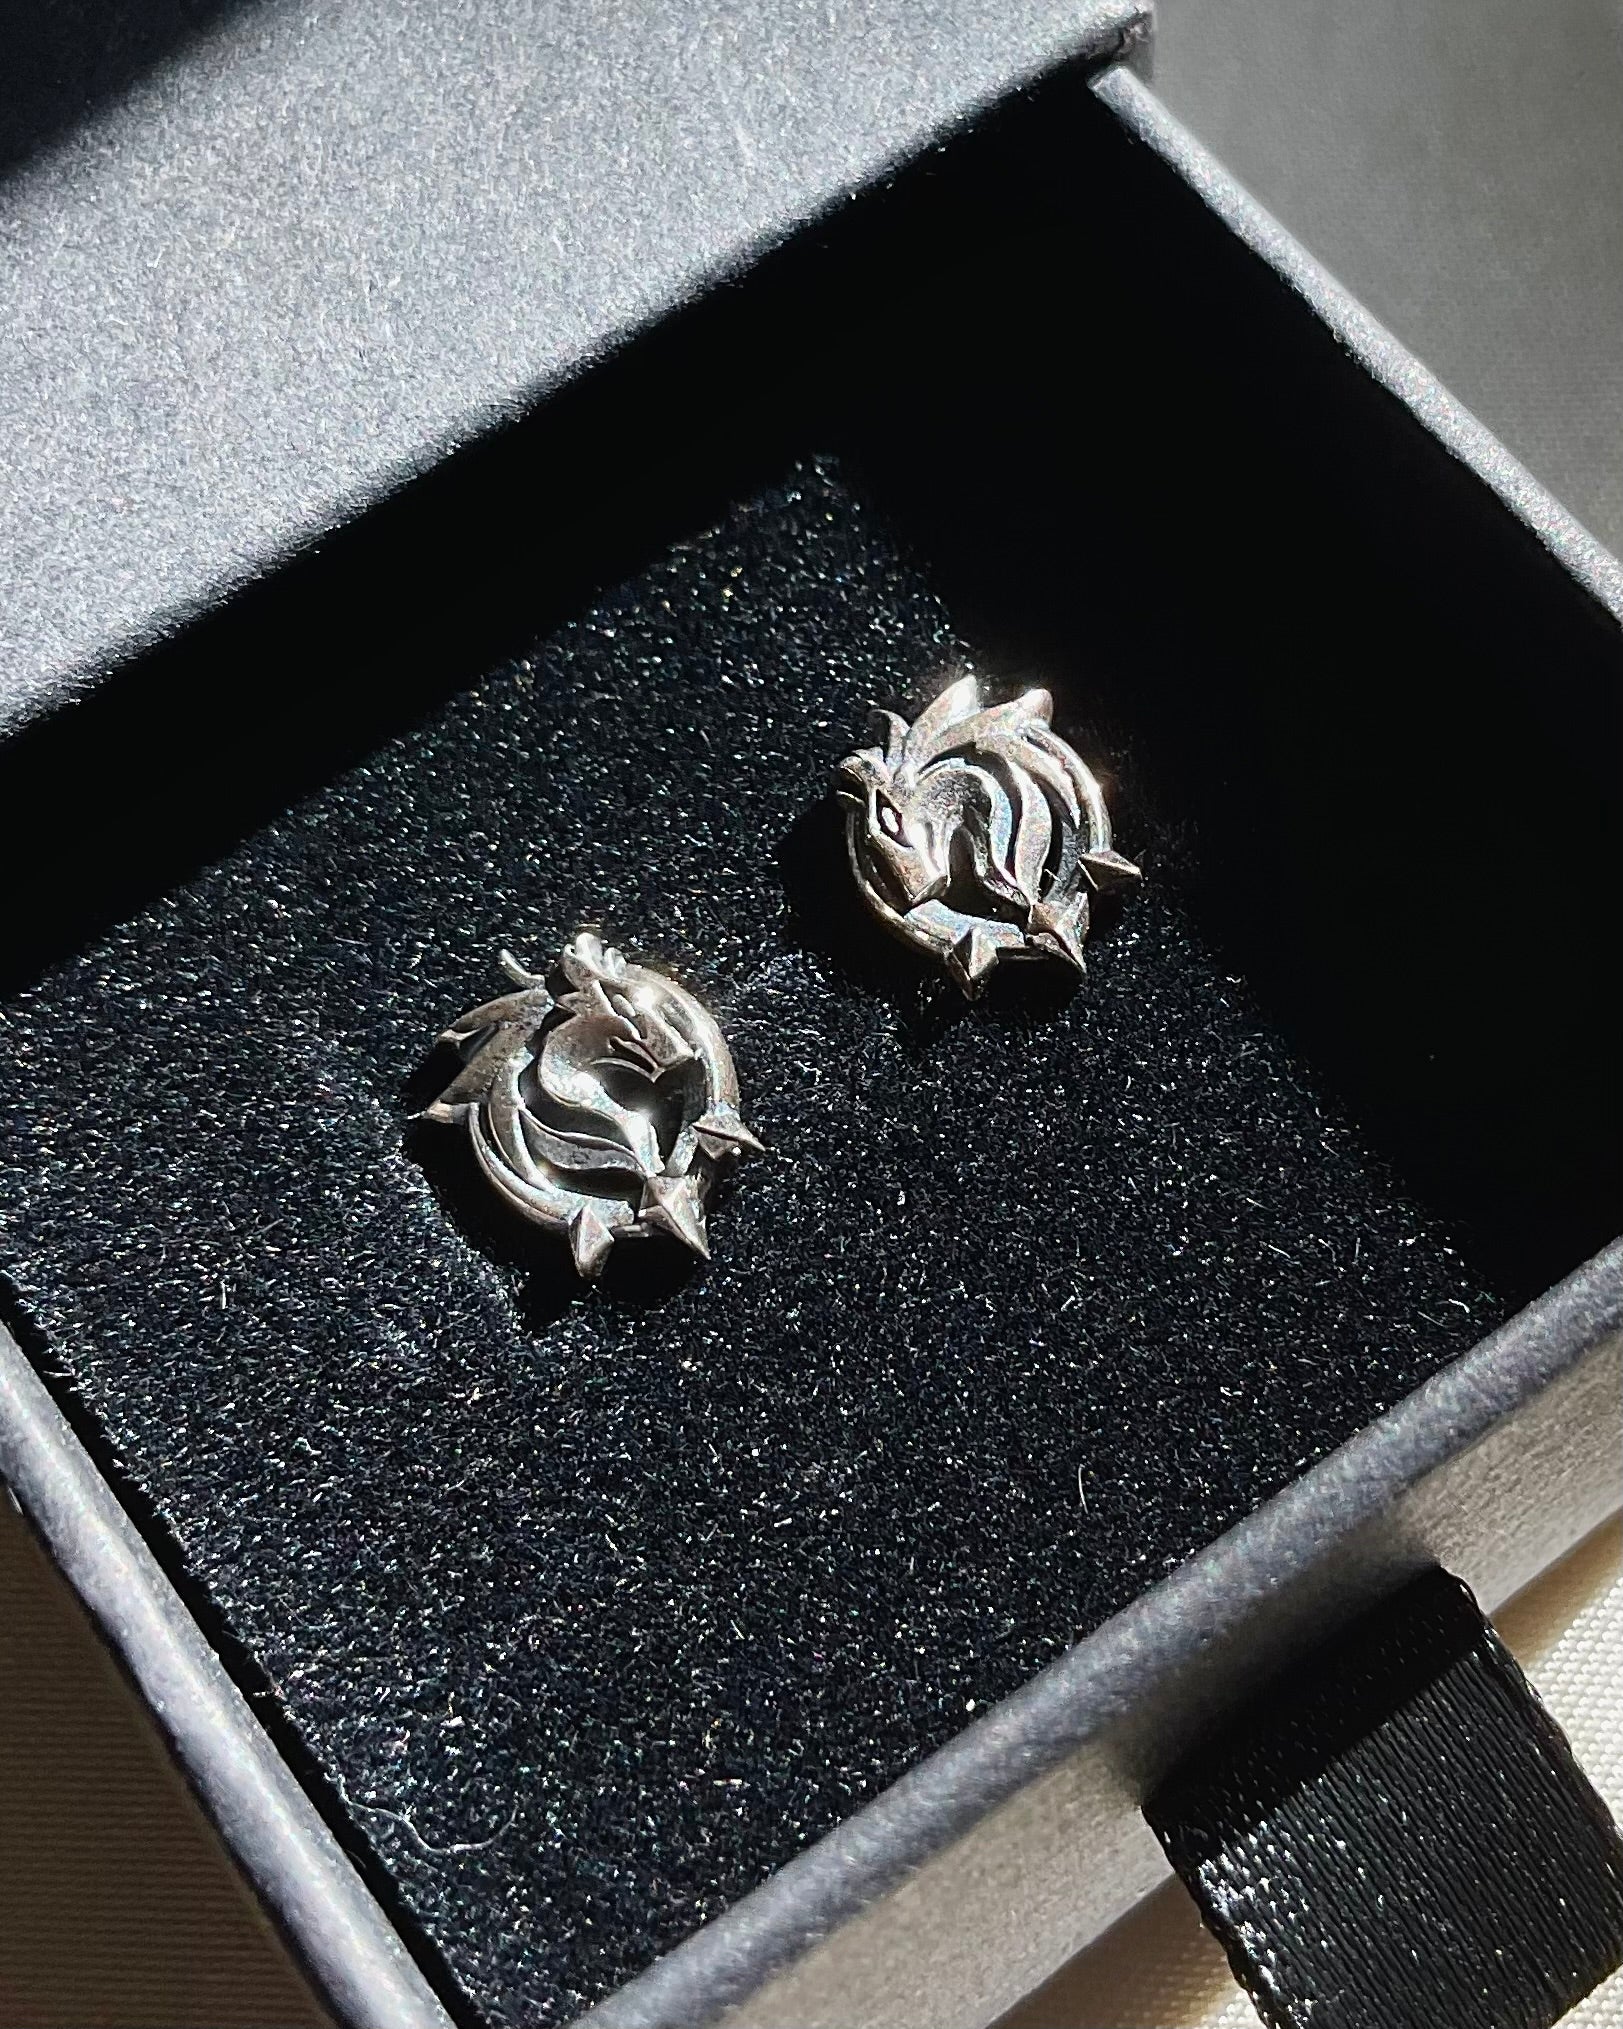 Wriothesley Silver Stud Earrings - Meowmeowgirl's Market